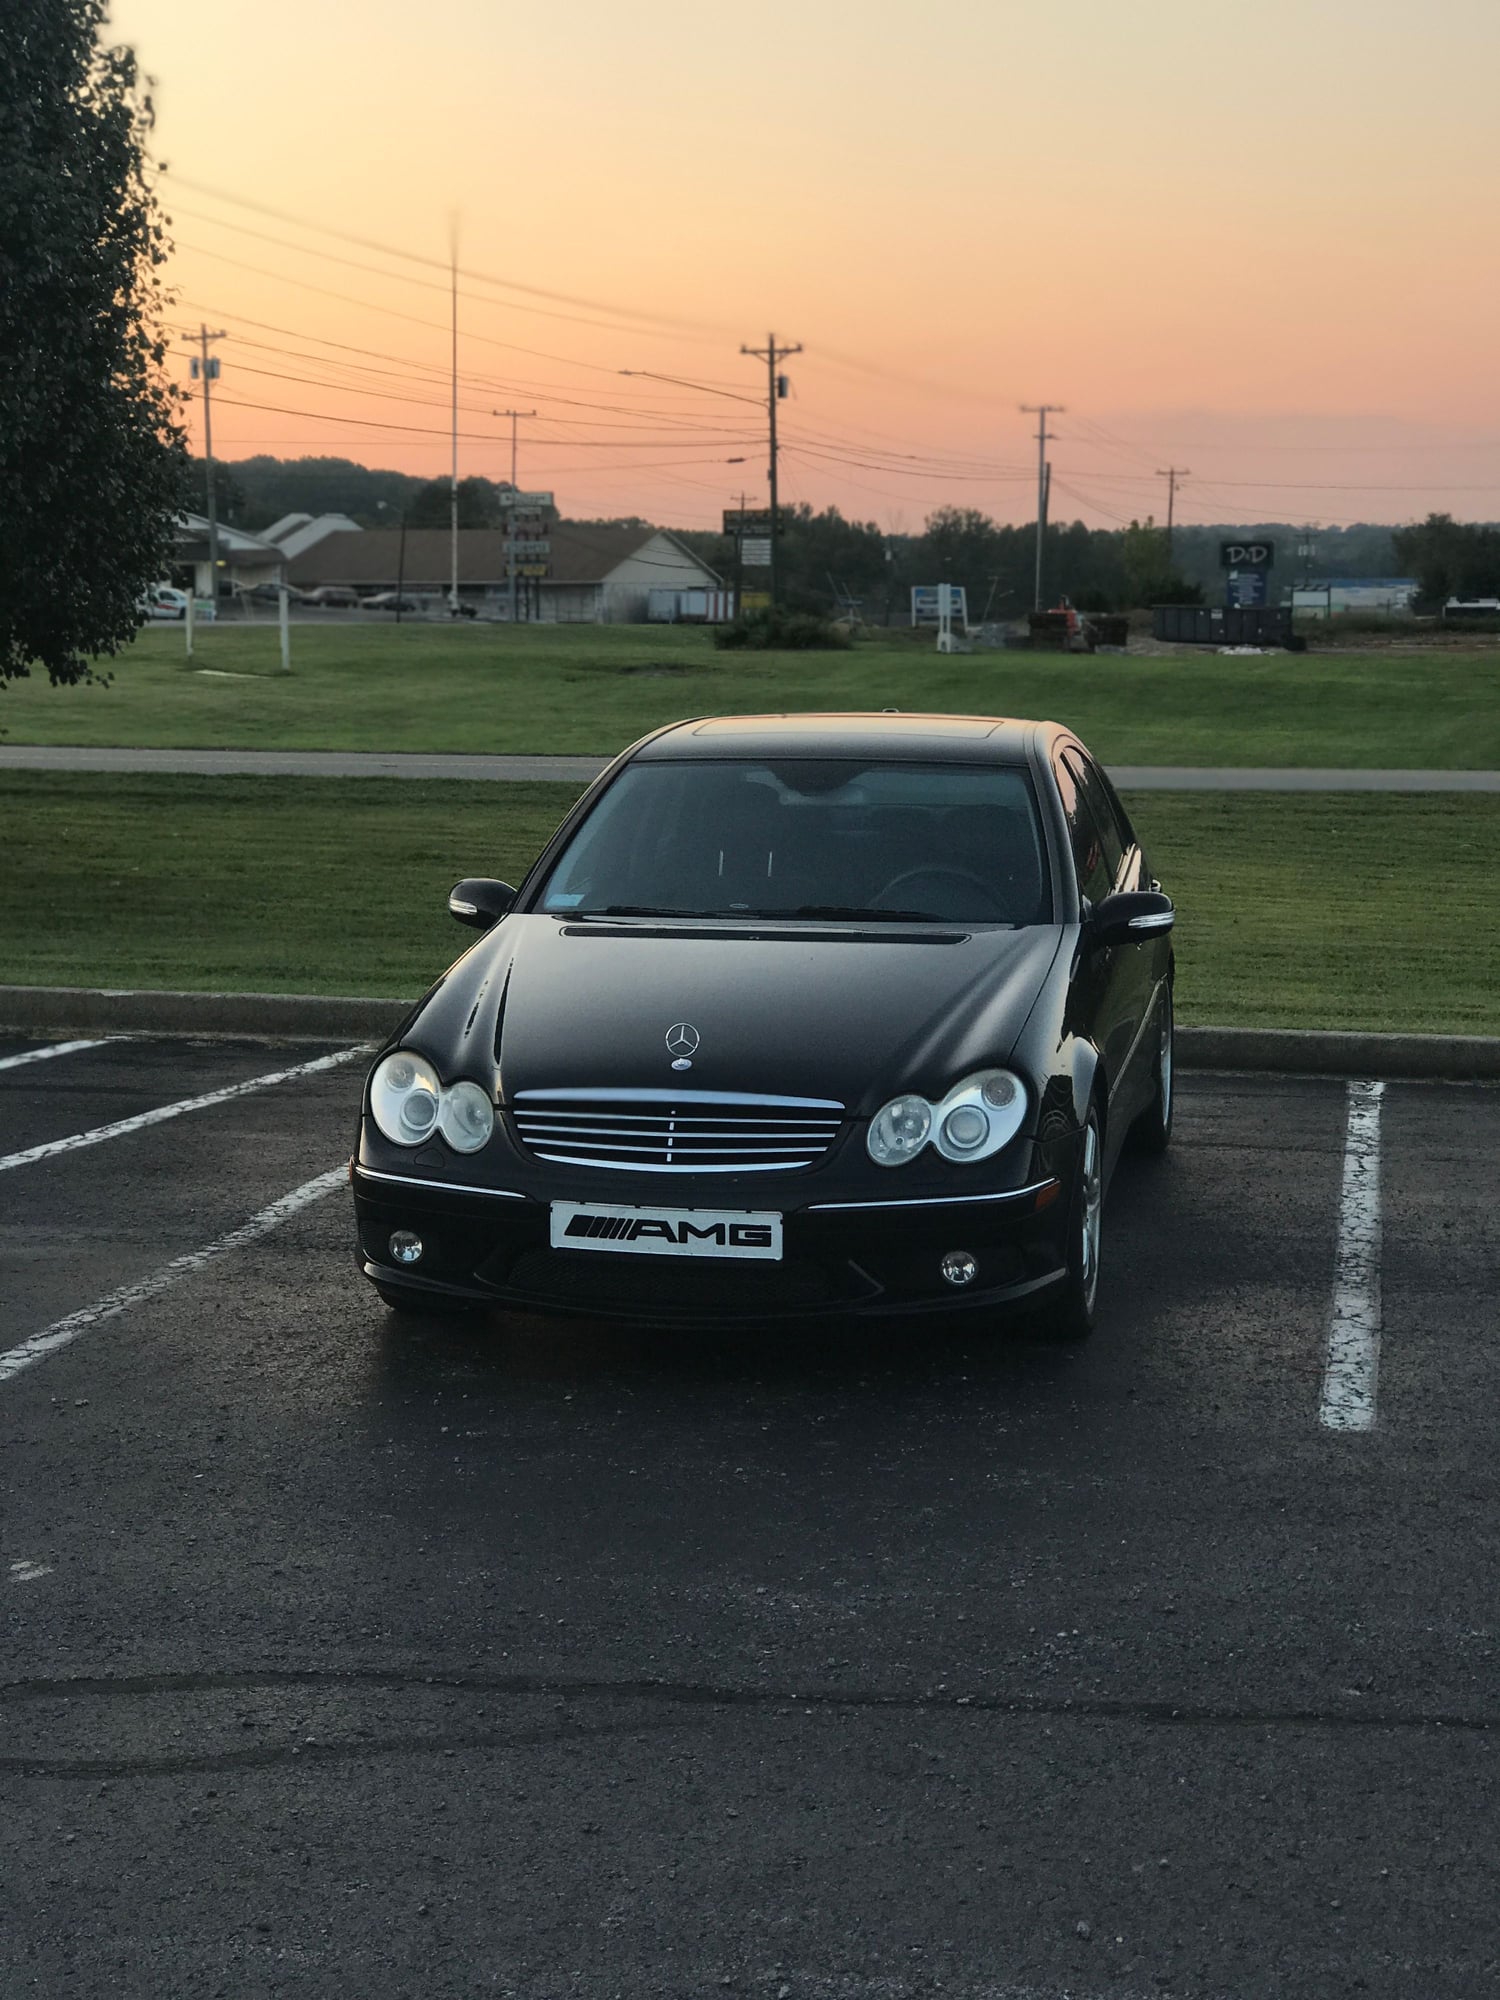 2006 Mercedes-Benz C55 AMG - Never thought I'd make this post but time to sell my baby - Used - VIN WDBRF76JX6F738293 - 155,000 Miles - 8 cyl - 2WD - Automatic - Sedan - Black - Clarksville, TN 37042, United States